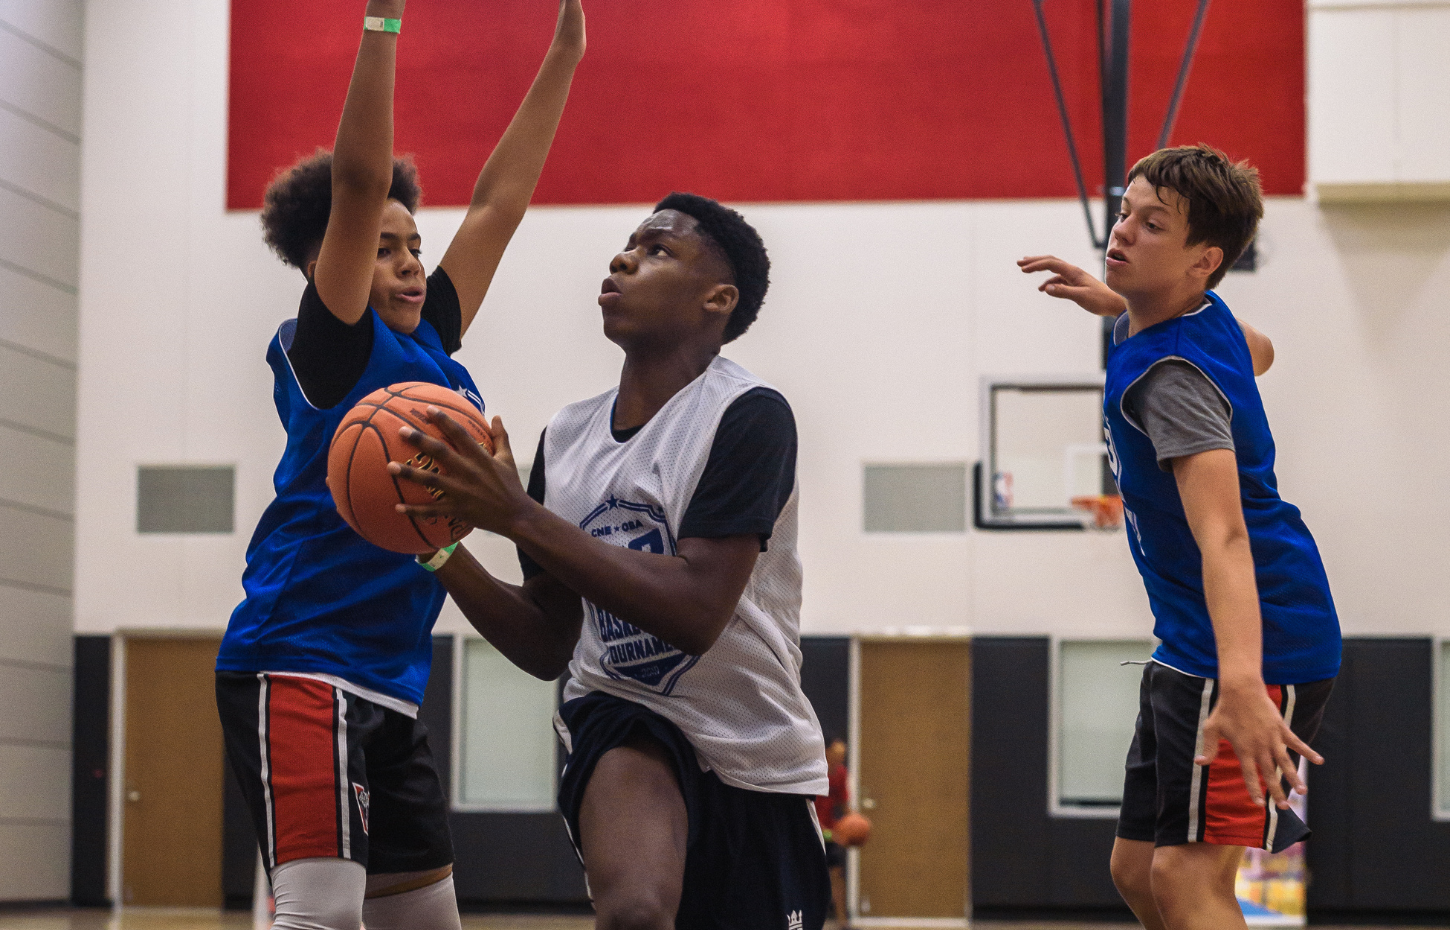 Three young athletes playing a game of basketball in a gymnasium.